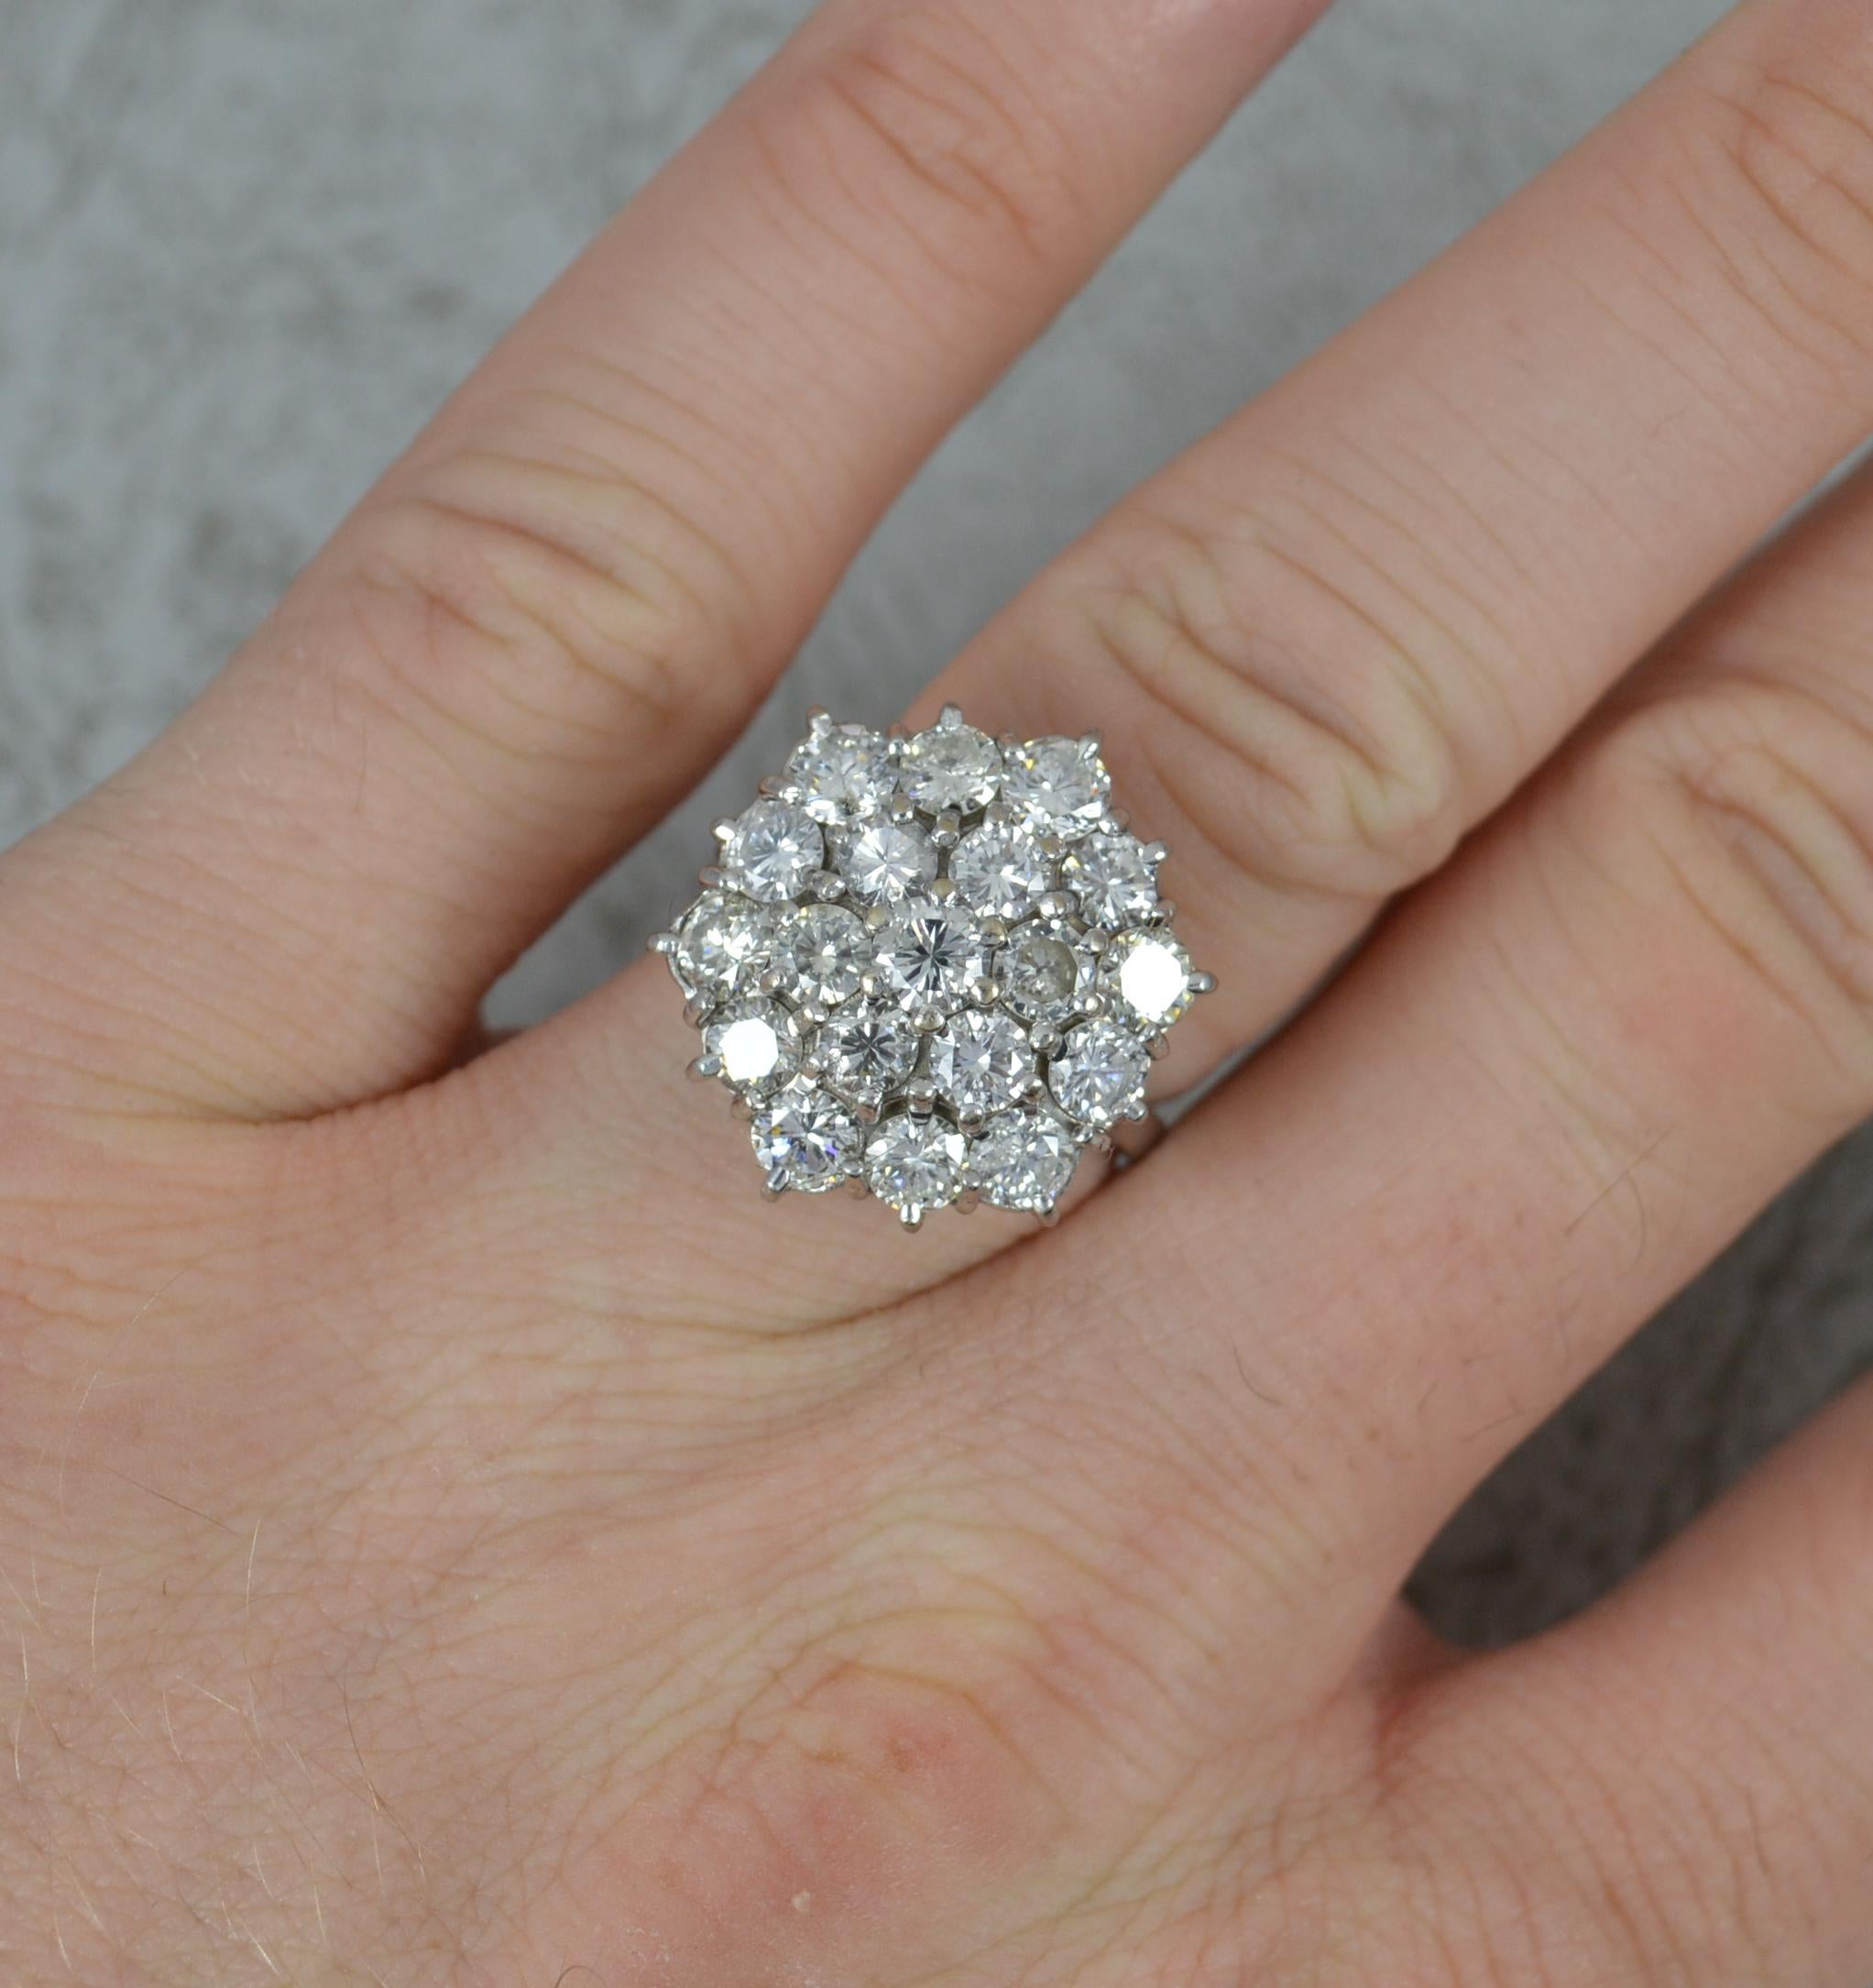 A large natural diamond cluster cocktail ring.
Solid 18 carat white gold example.
Set with nineteen natural round brilliant cut diamonds forming a hexagonal shaped cluster. Approx 3.25 carats total. Clean, bright and sparkly.
17mm x 20mm cluster.